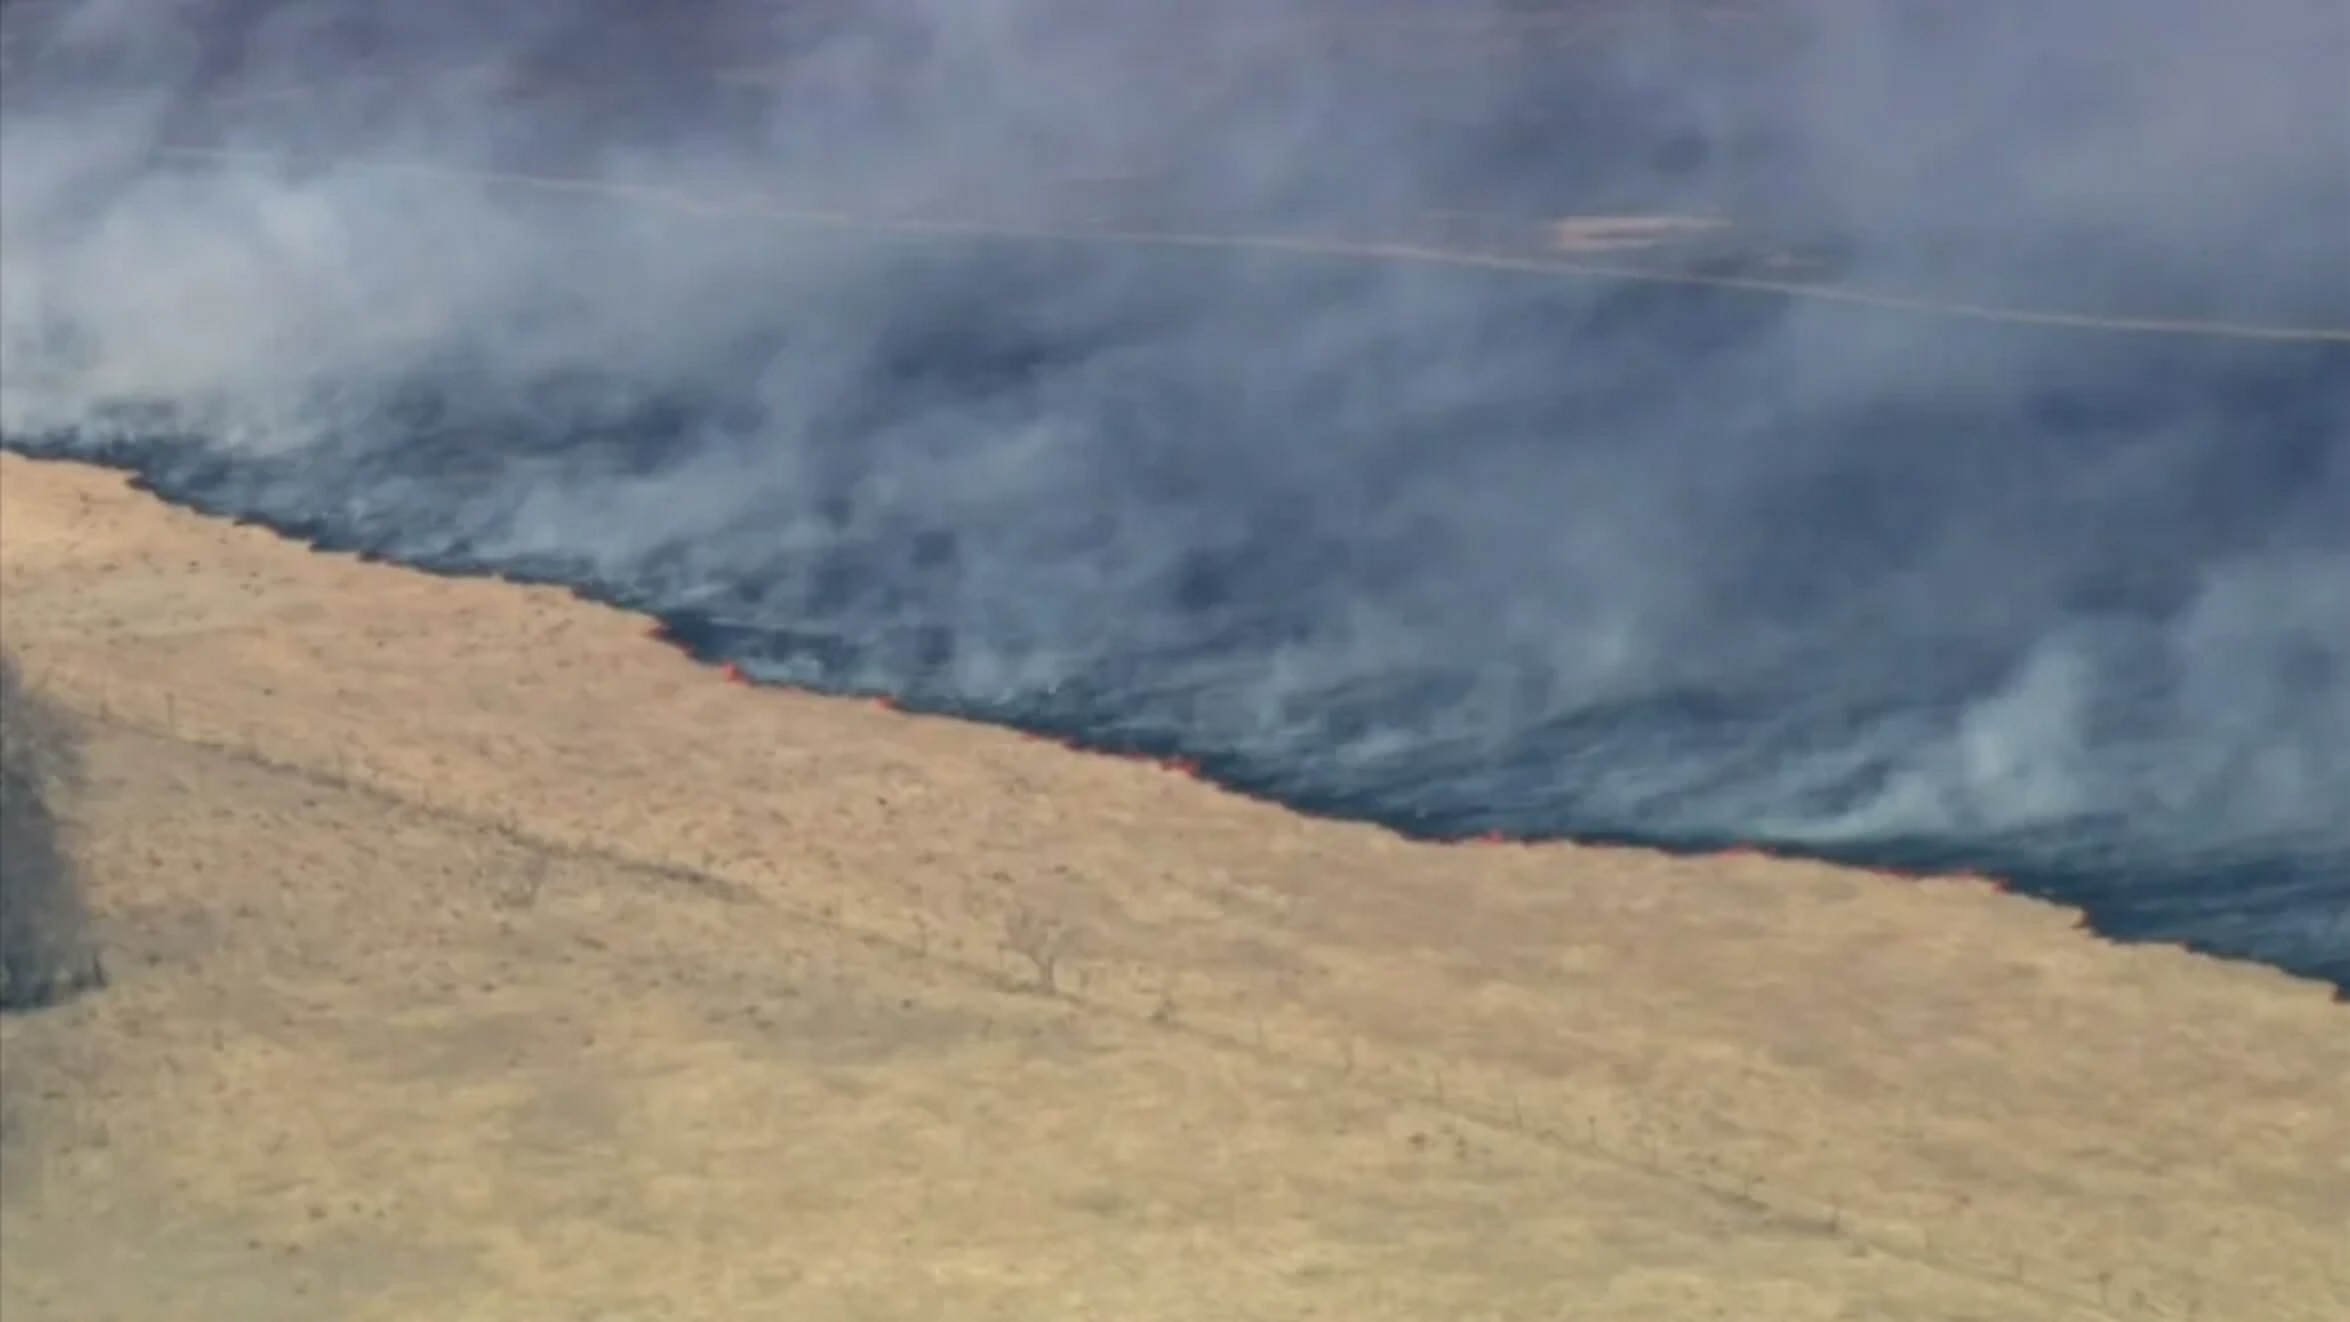 Aerial view of a wildfire burning in a large swath of land west of Fort Worth, Texas on Friday, 18 March 2022, in what fire officials call the Eastland Complex. Photo: NBC 5 News